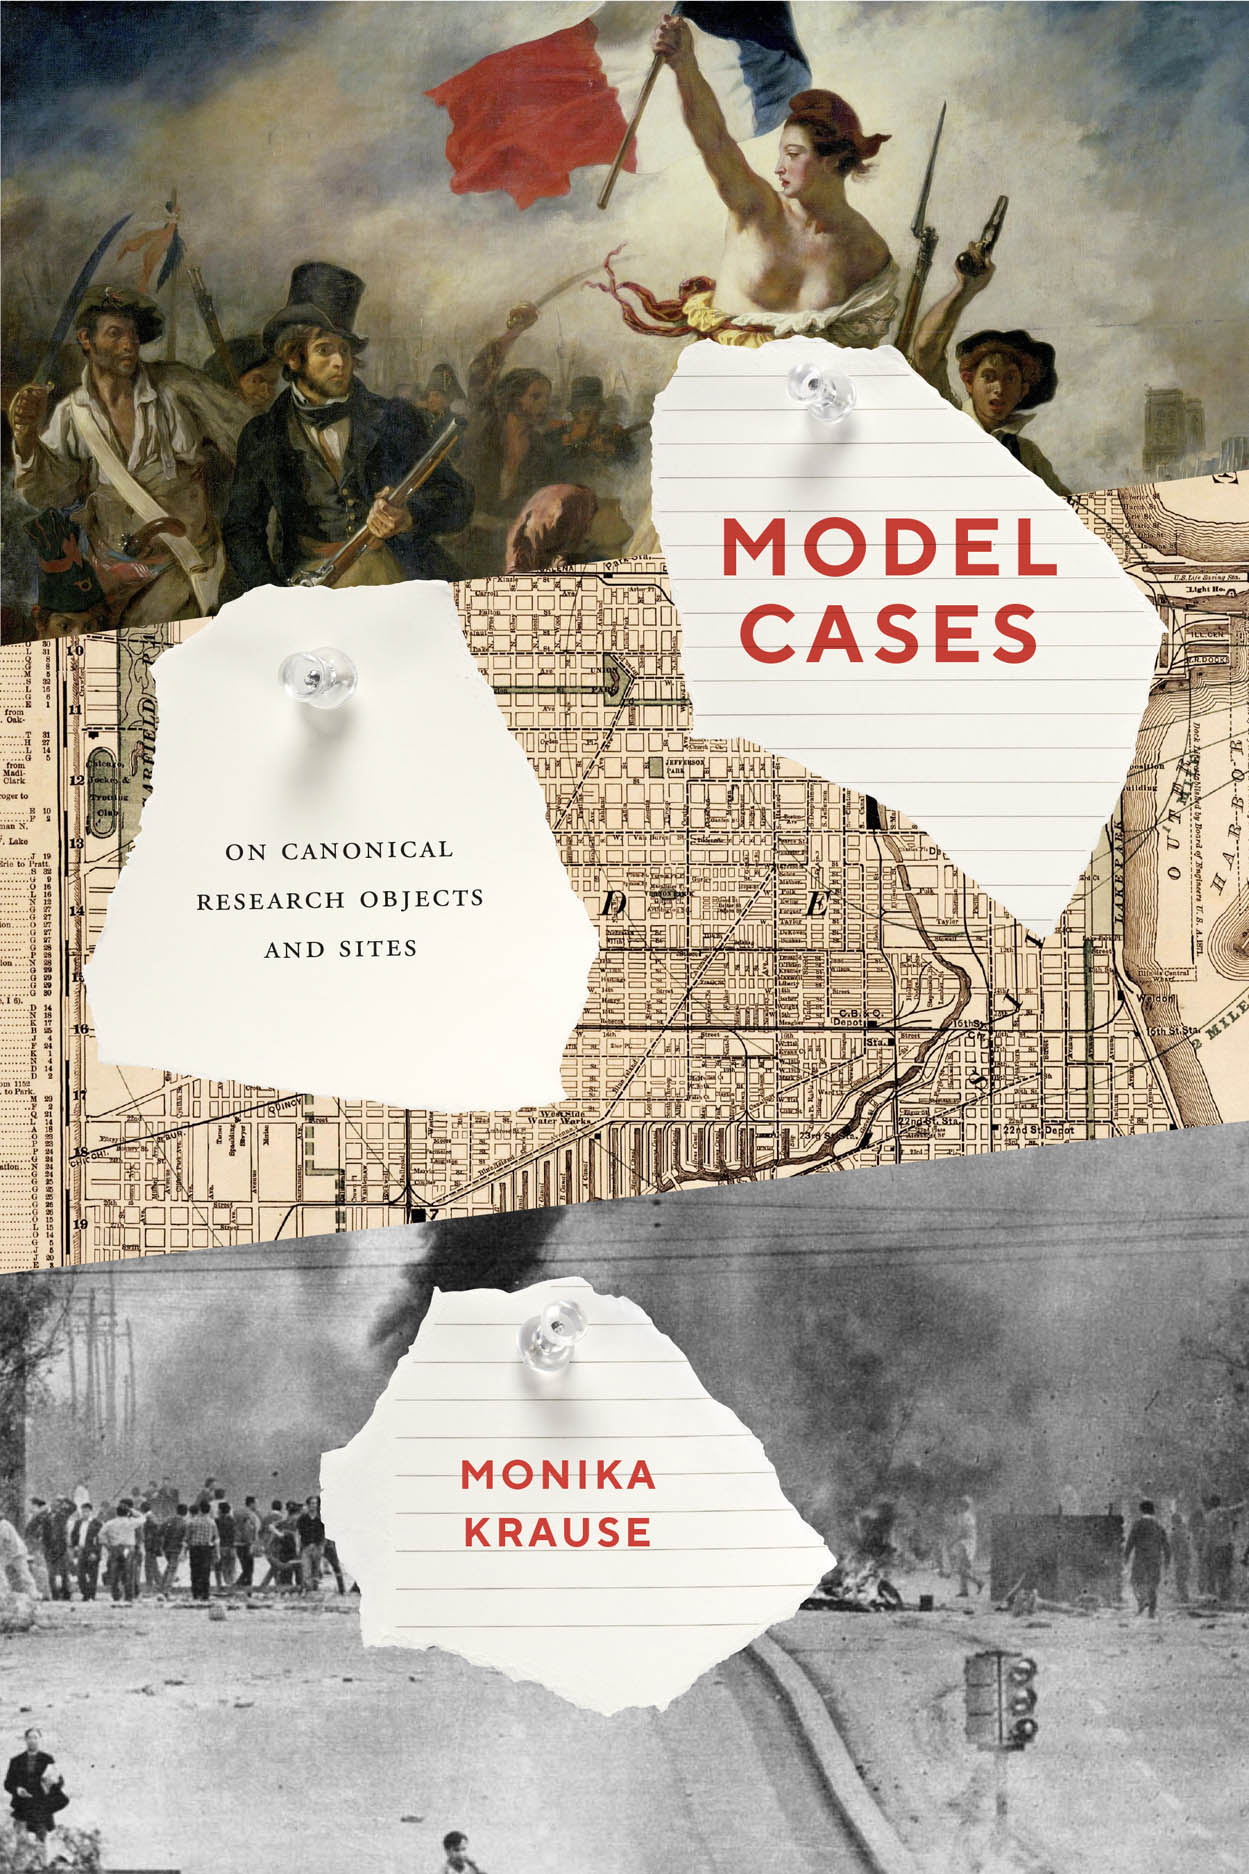 Book Cover of Monika Krause's "Model Cases"